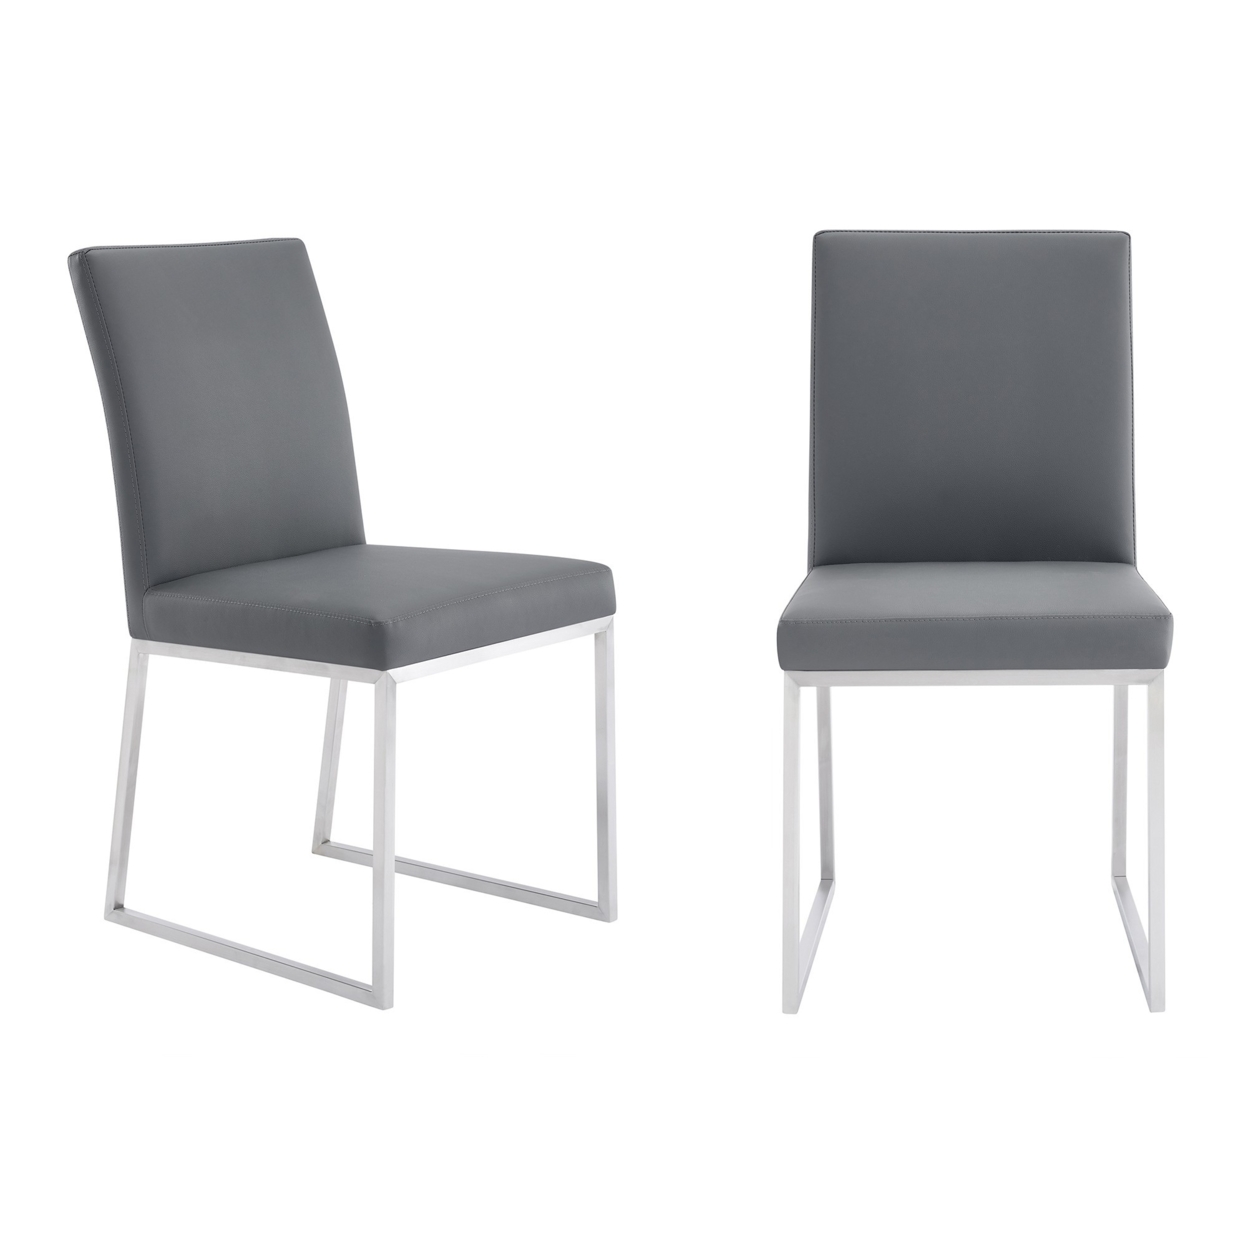 20 Inches Leatherette Metal Frame Dining Chair, Set Of 2, Gray- Saltoro Sherpi